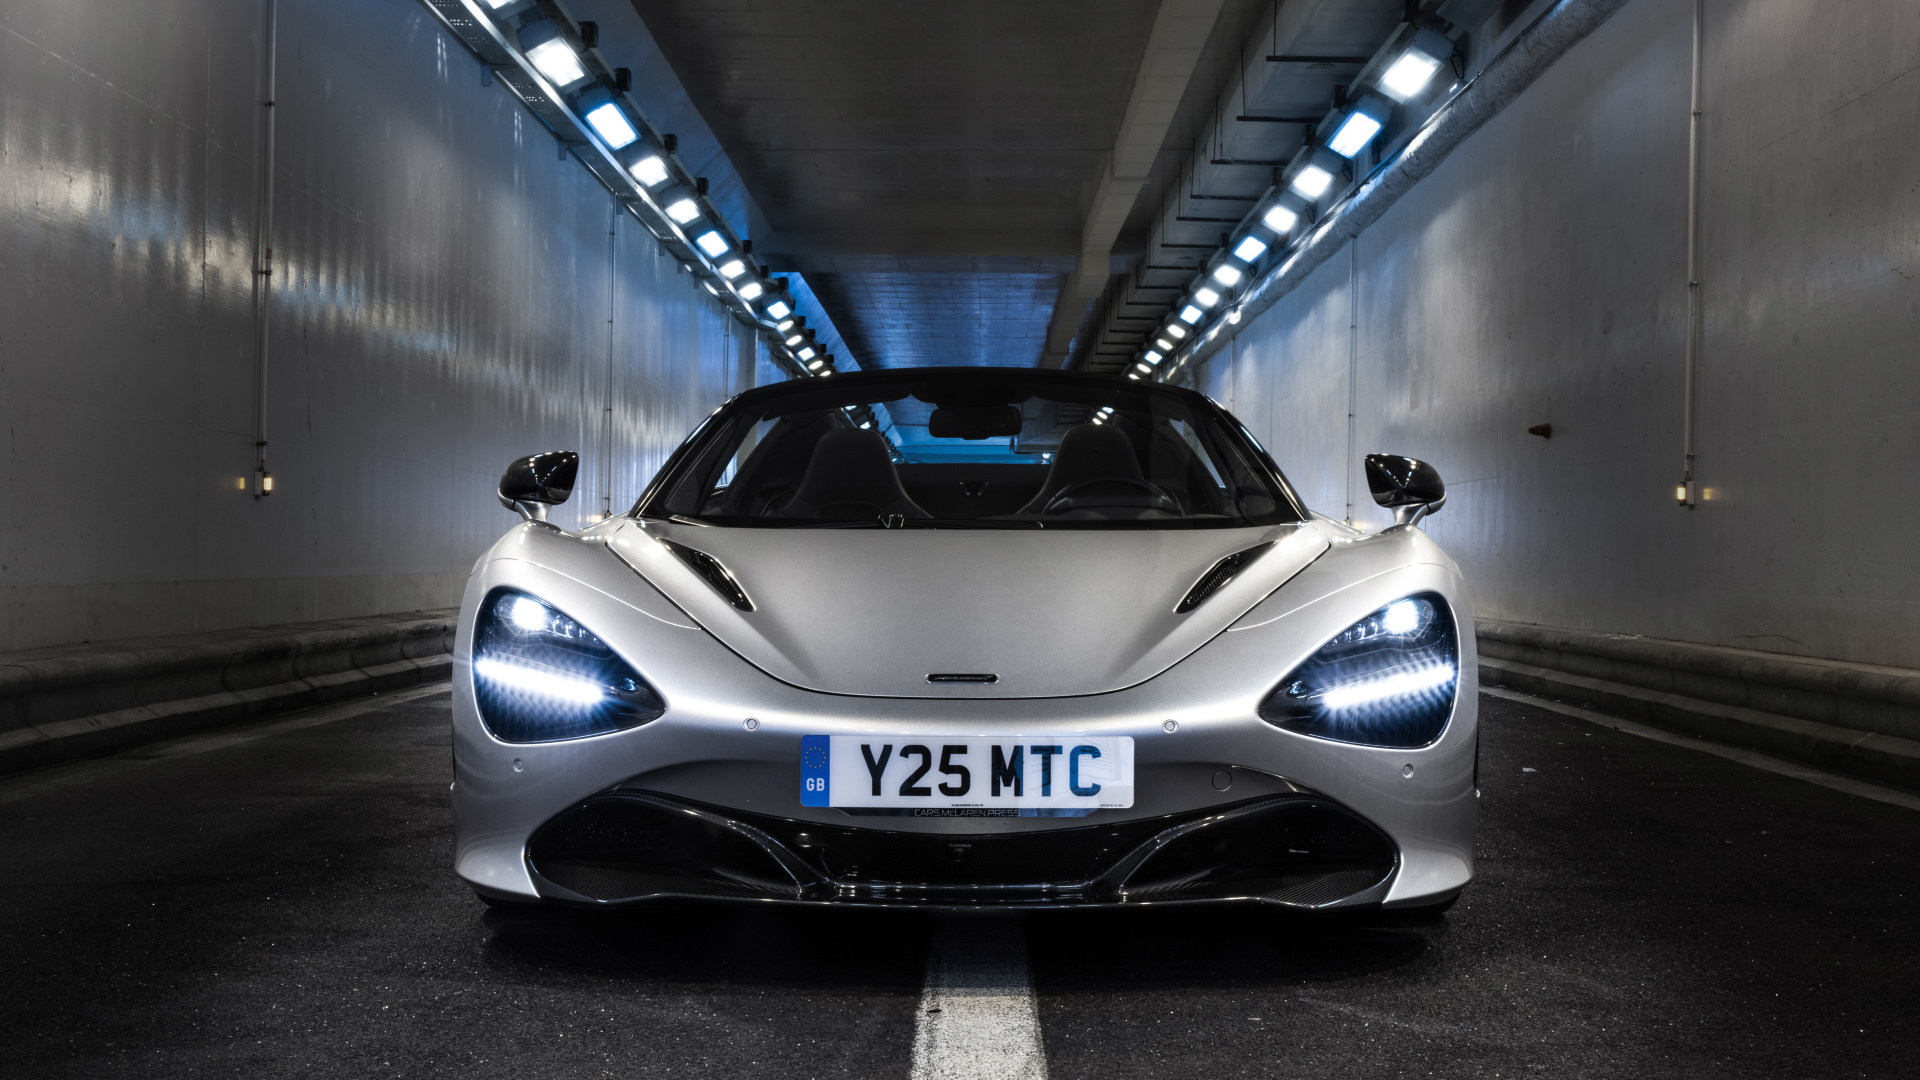 Silver sports car McLaren 720S Spider, 2019 in the tunnel